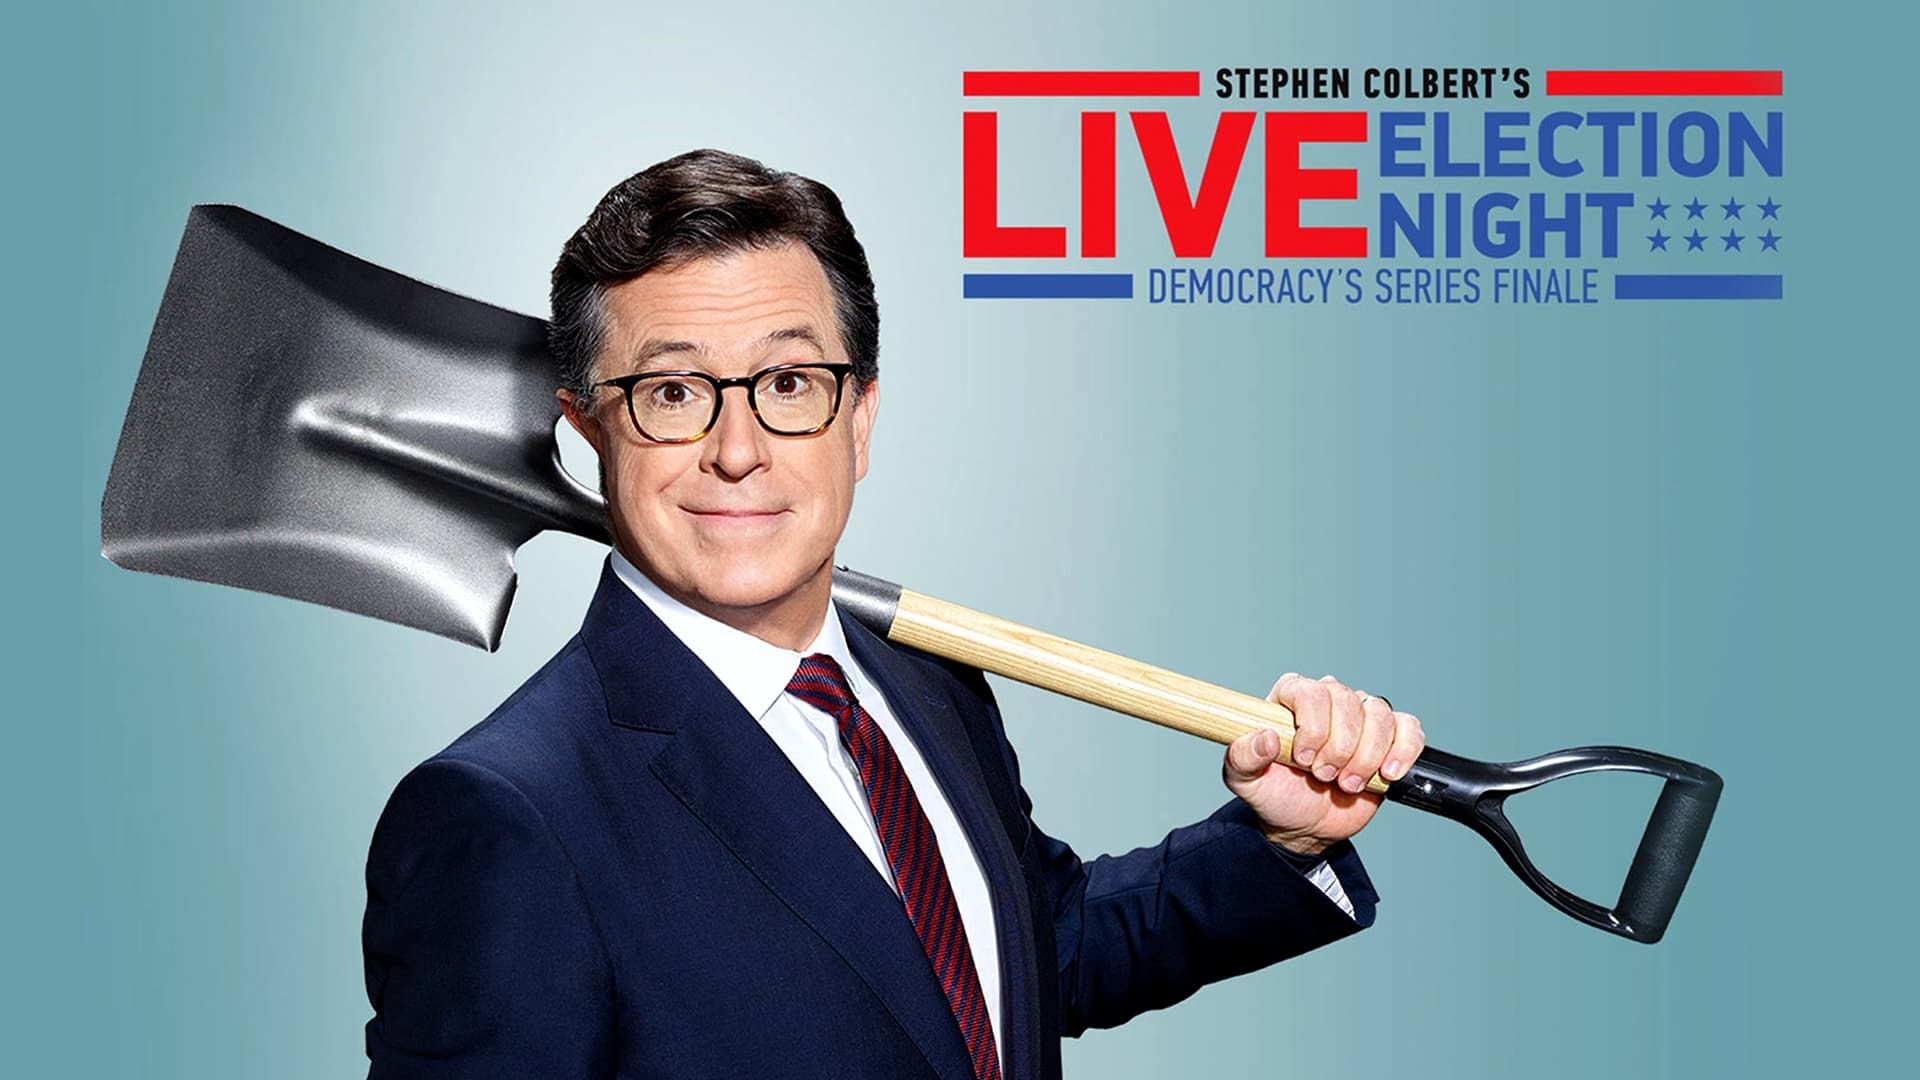 Stephen Colbert's Live Election Night Democracy's Series Finale: Who's Going to Clean Up This Sh*t? background